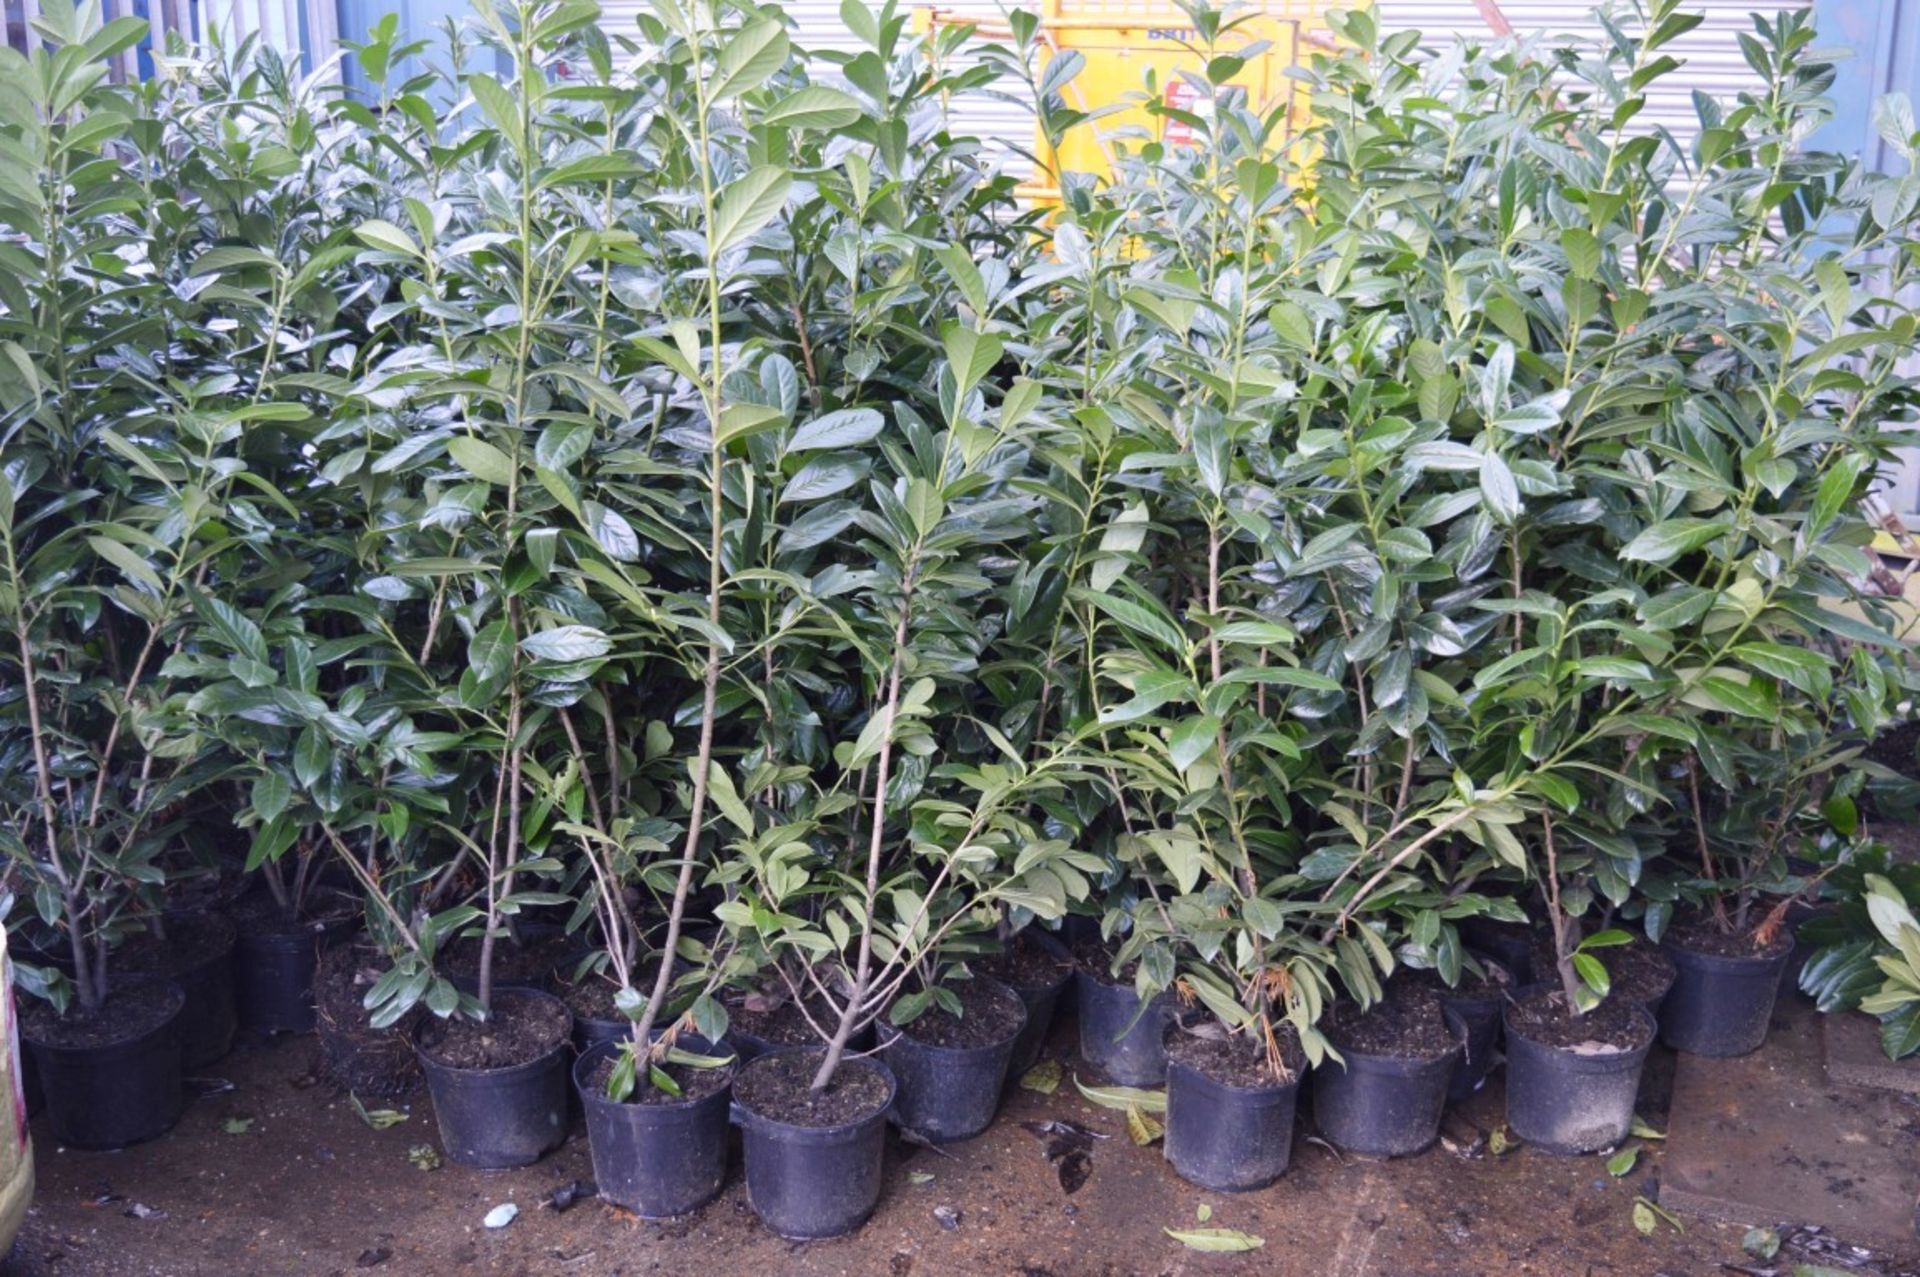 10 x Laurel Potted Garden Plants - Approx 4 to 5 Feet Tall - CL057 - Location: Welwyn, - Image 4 of 5